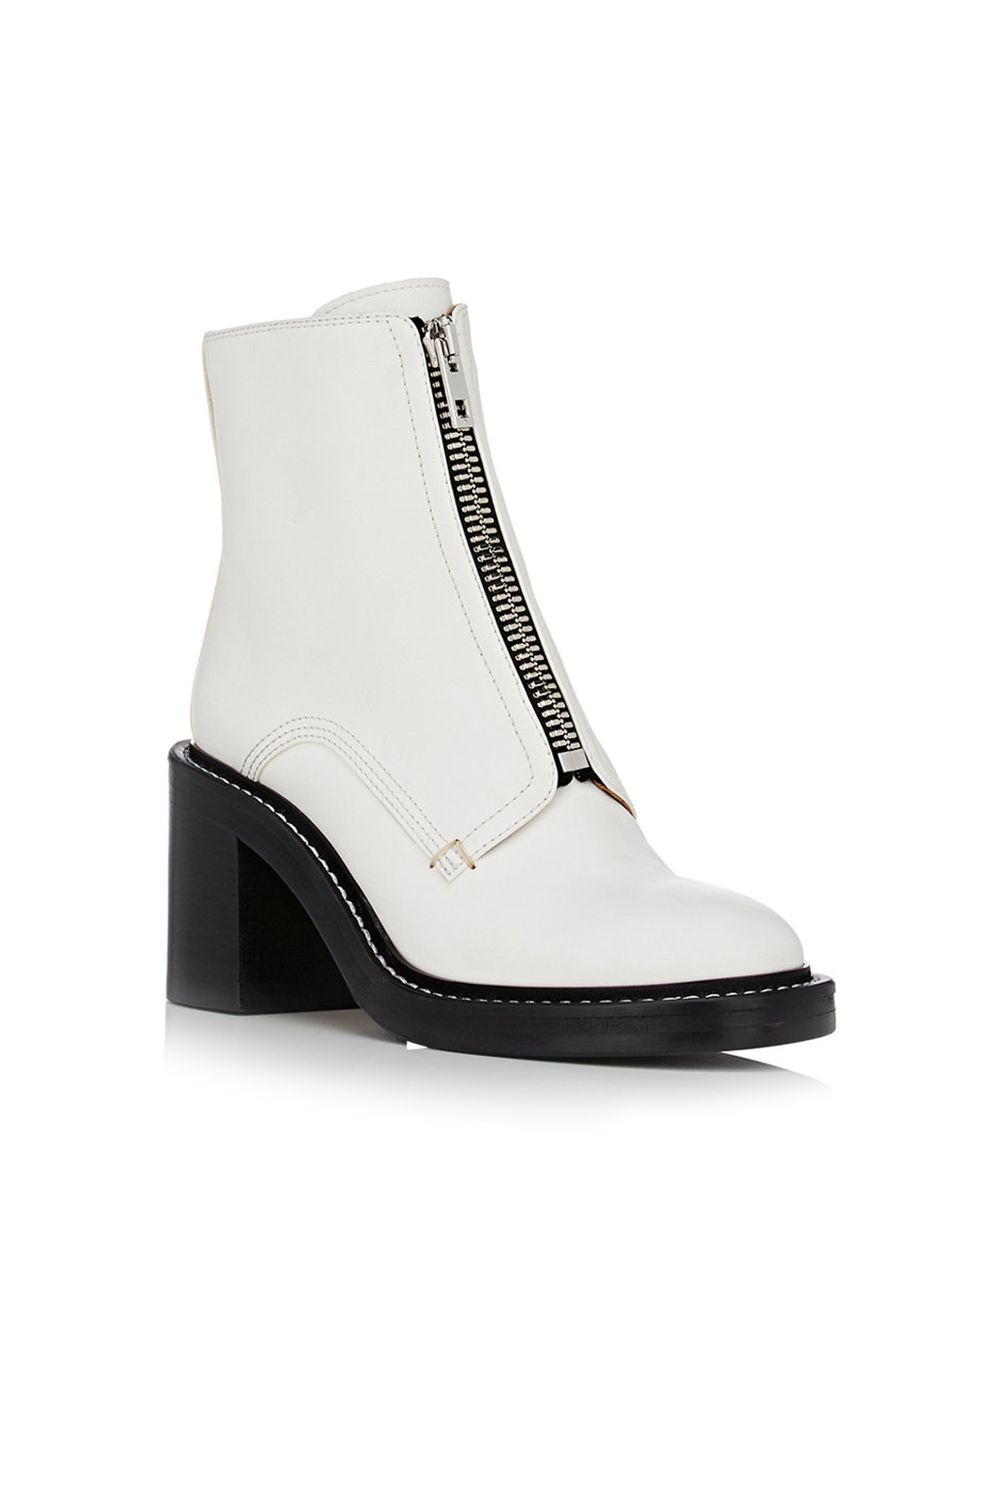 barneys white boots